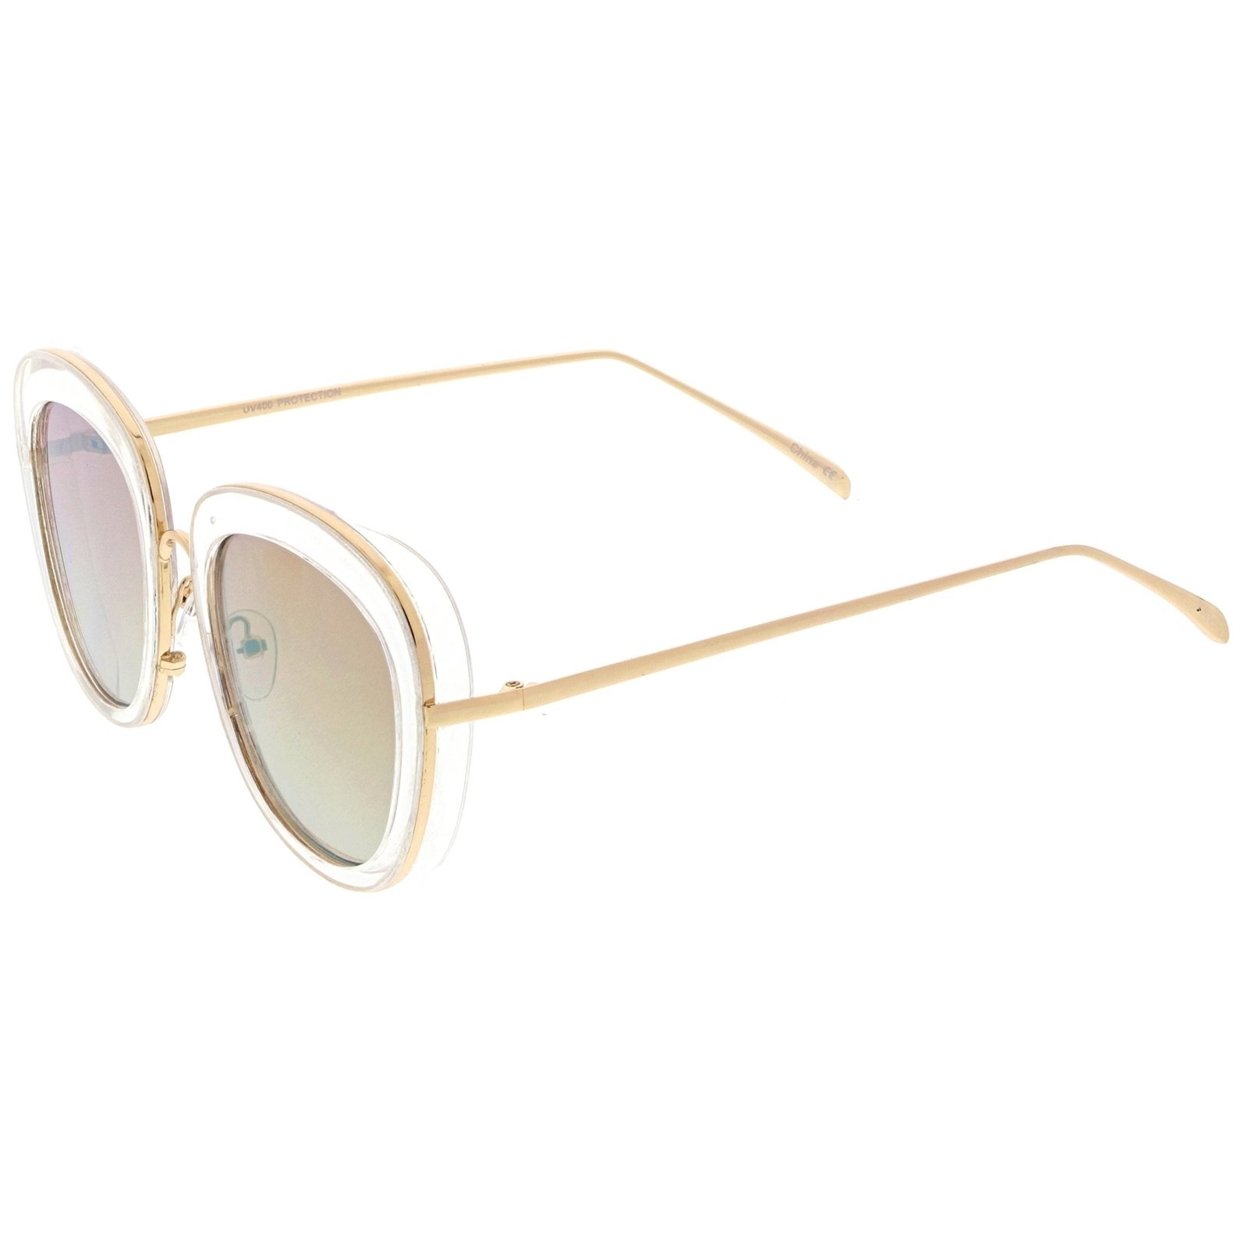 Women's Transparent Frame Square Colored Mirror Lens Oversize Sunglasses 53mm - Clear-Gold / Blue Mirror